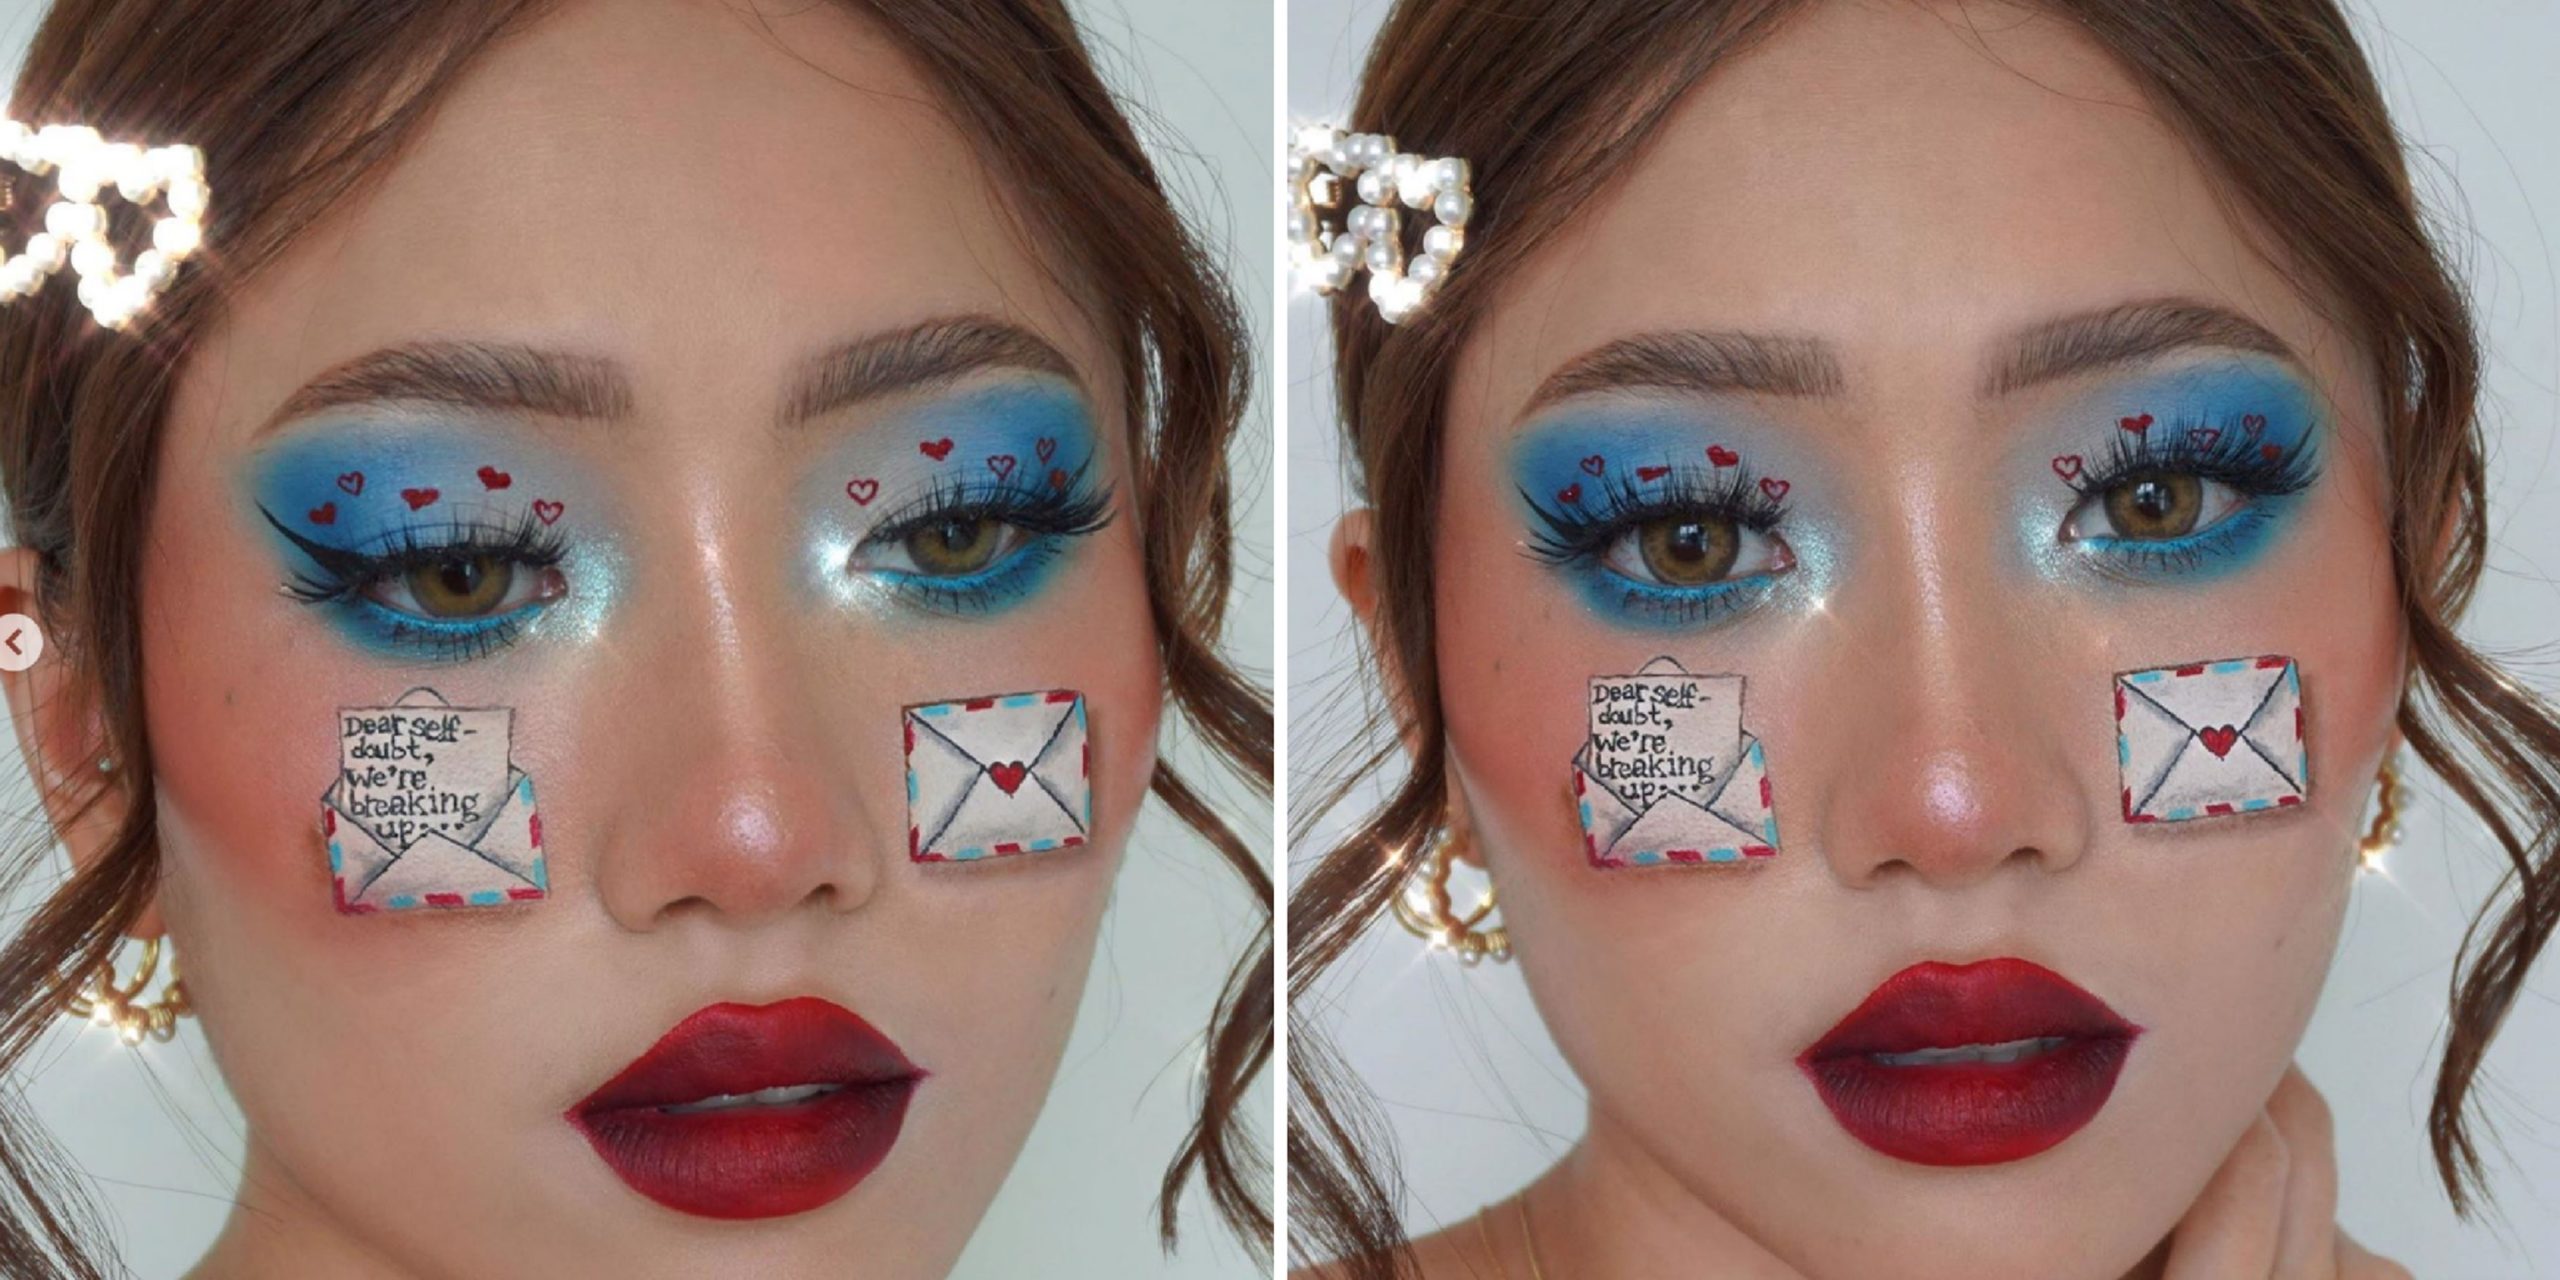 This Beauty Creator's Mail-Themed Makeup Look Has a Deeper Meaning — See the Photos